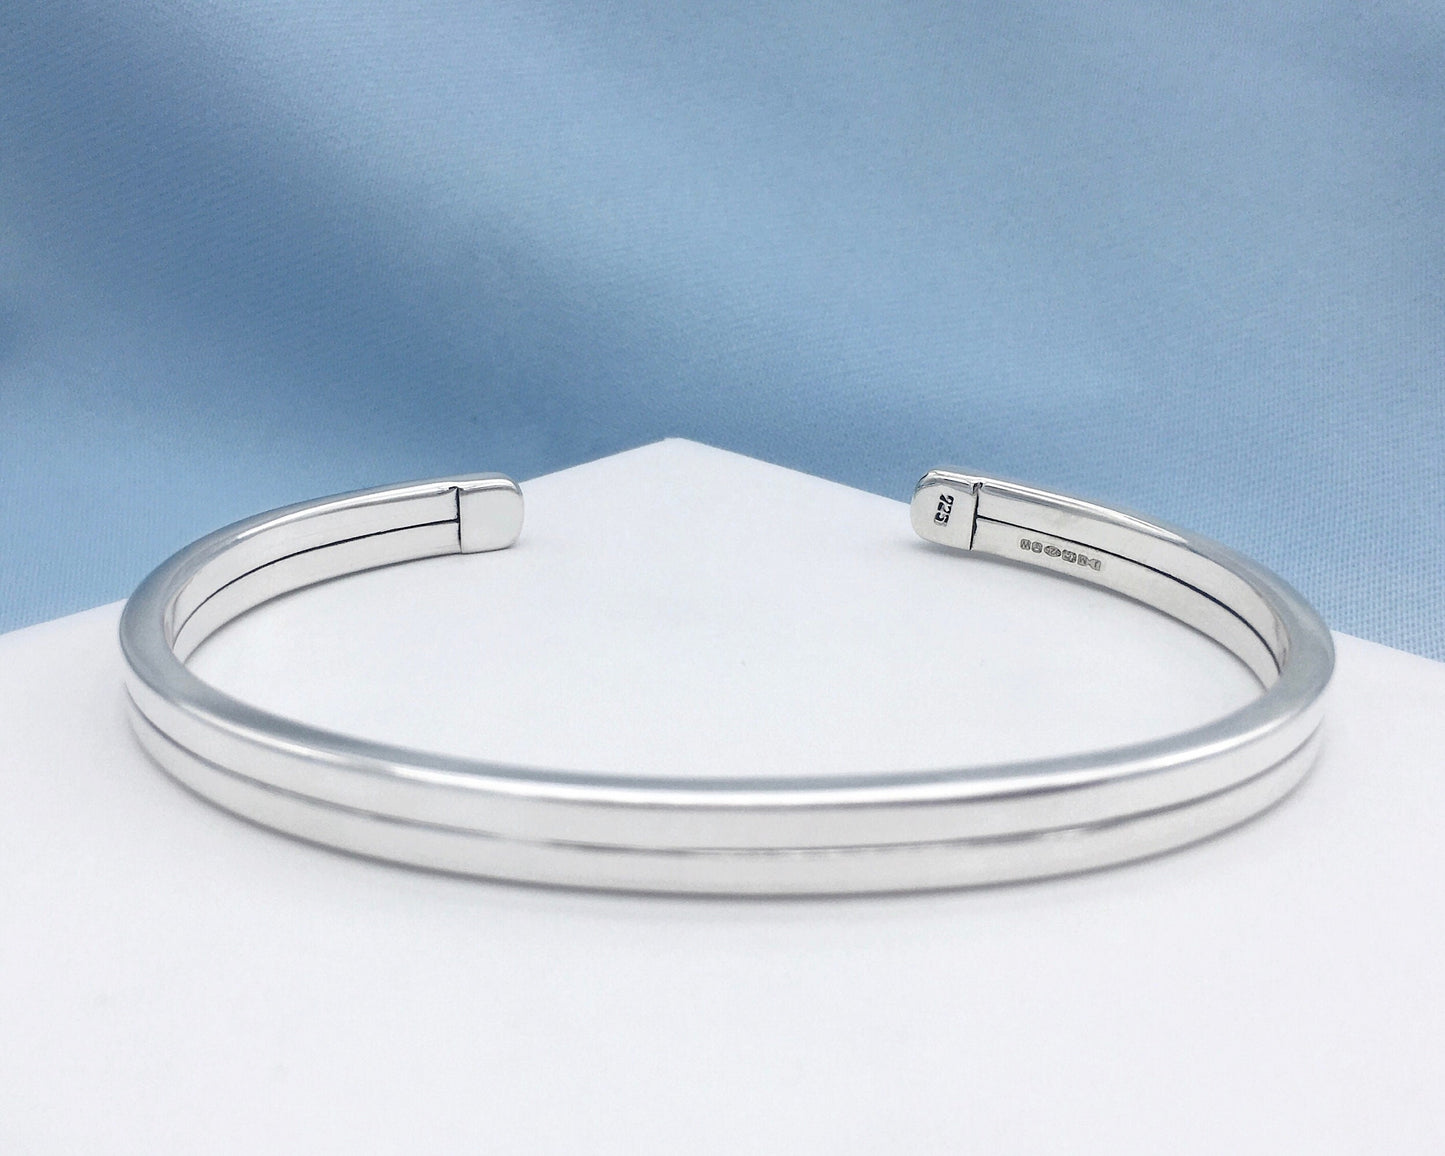 Fathers day Gift for Him Plus Size Silver Bangle Large Mens Silver Cuff Bracelet Chunky Mans Bangle Personalised Bracelet Large Wrist Bangle